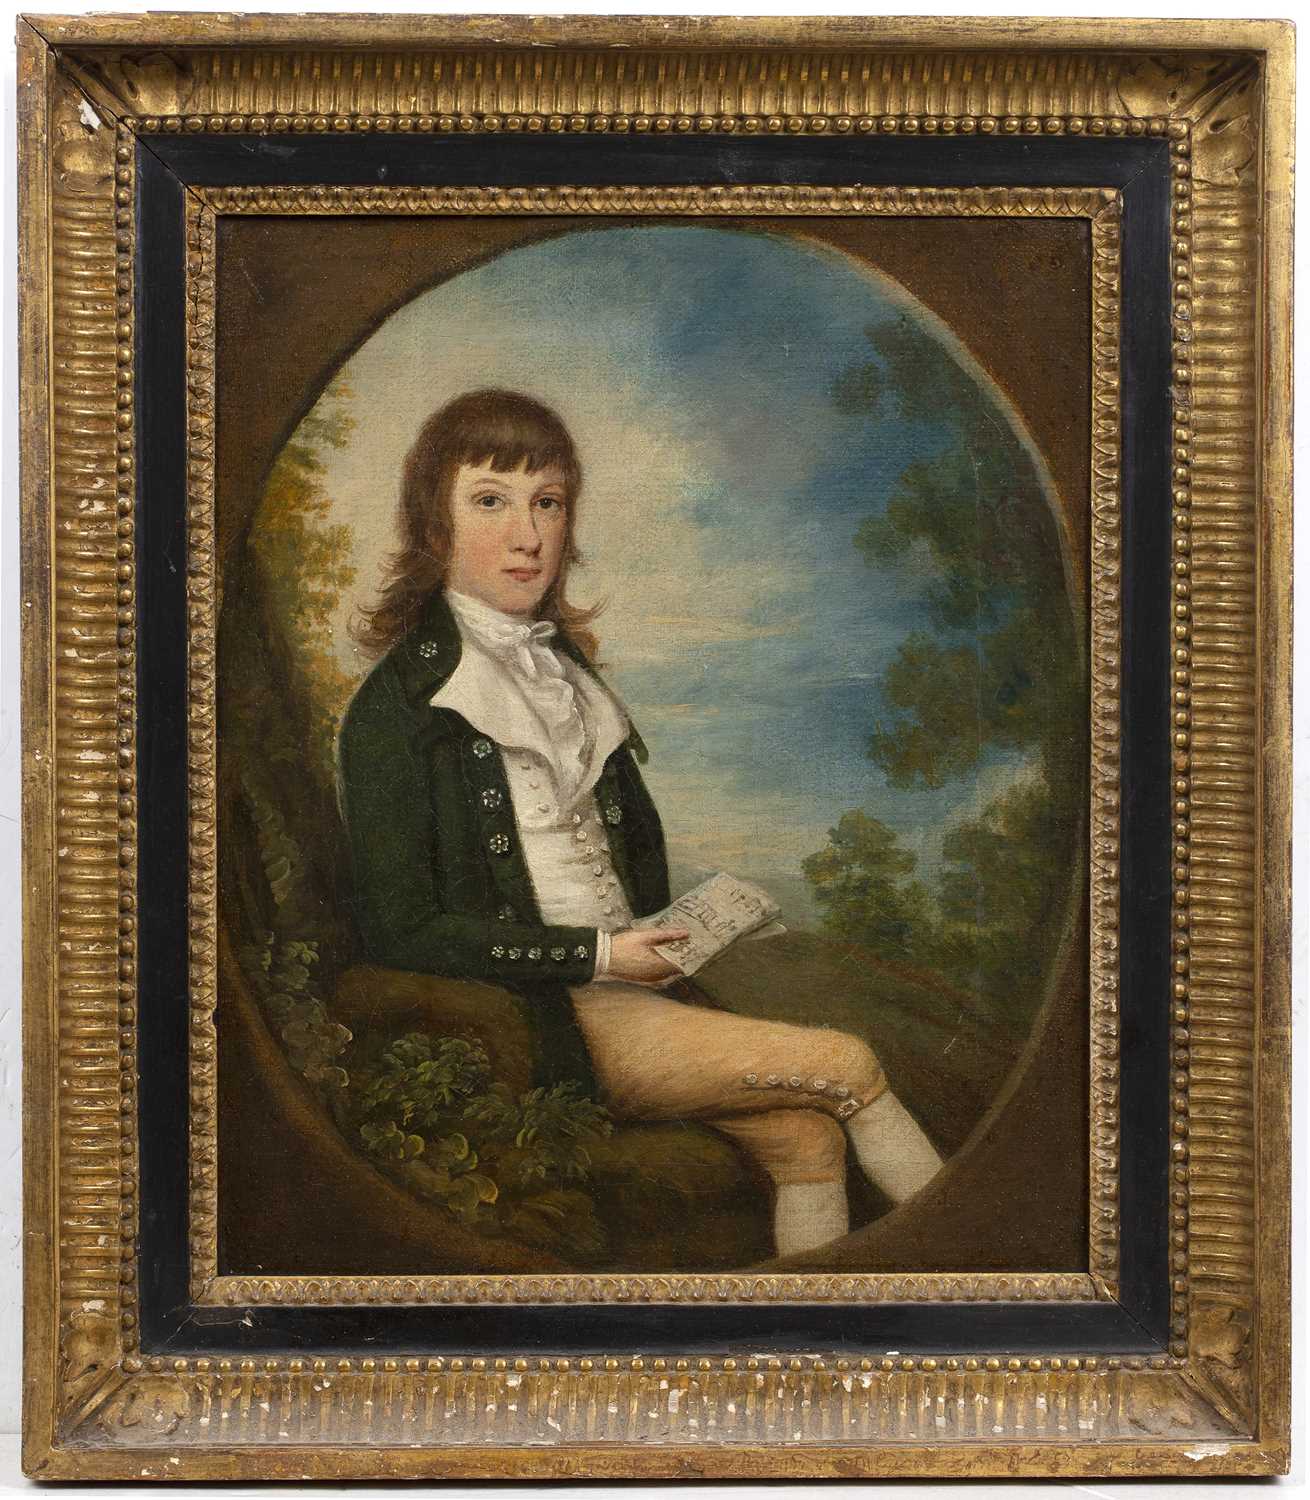 Attributed to Daniel Gardner (1750-1805) Portrait of a young boy seated with music manuscript in a - Image 2 of 3